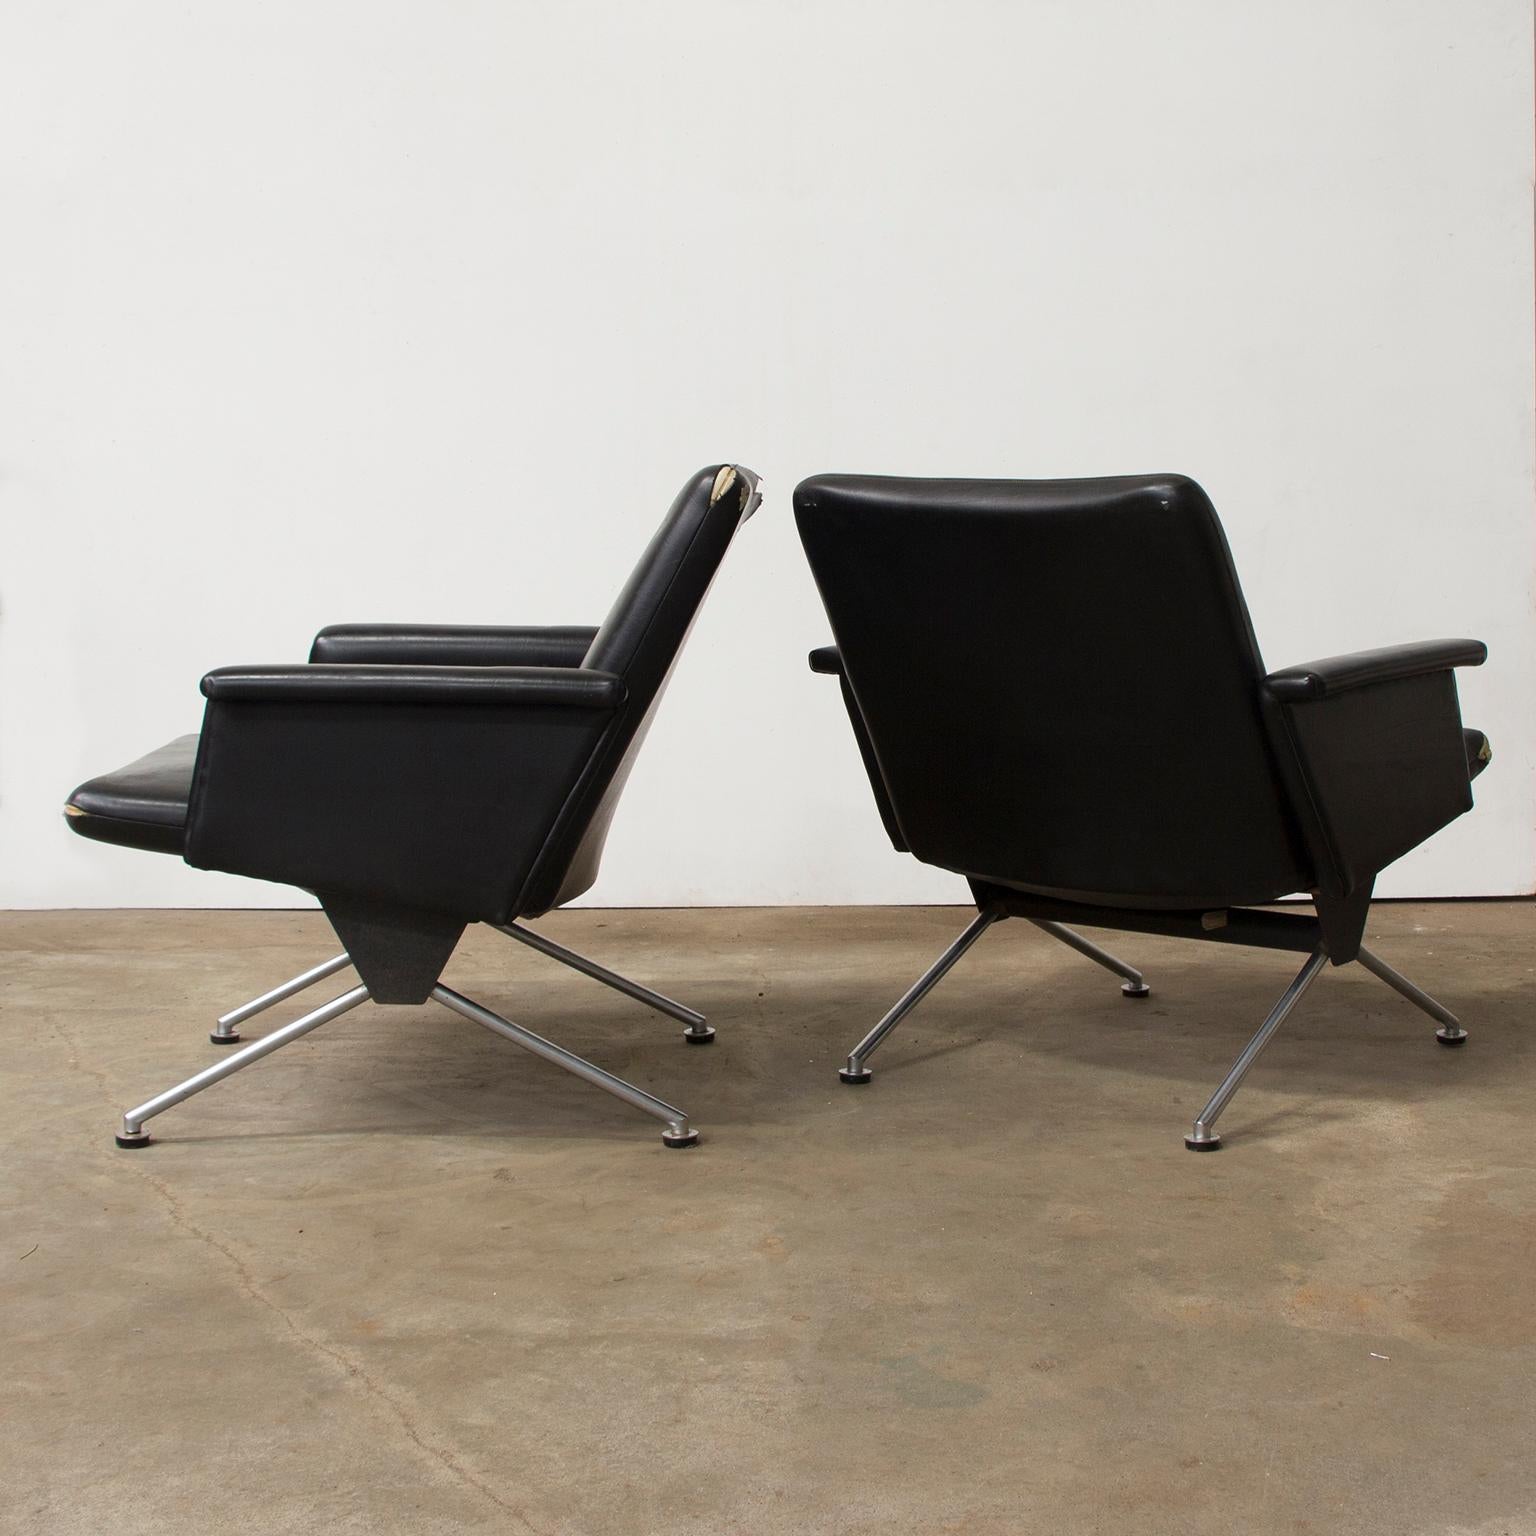 Industrial 1961, Andre Cordemeyer for Gispen, Set of Two Midcentury Dutch Easy Chairs 1432 For Sale